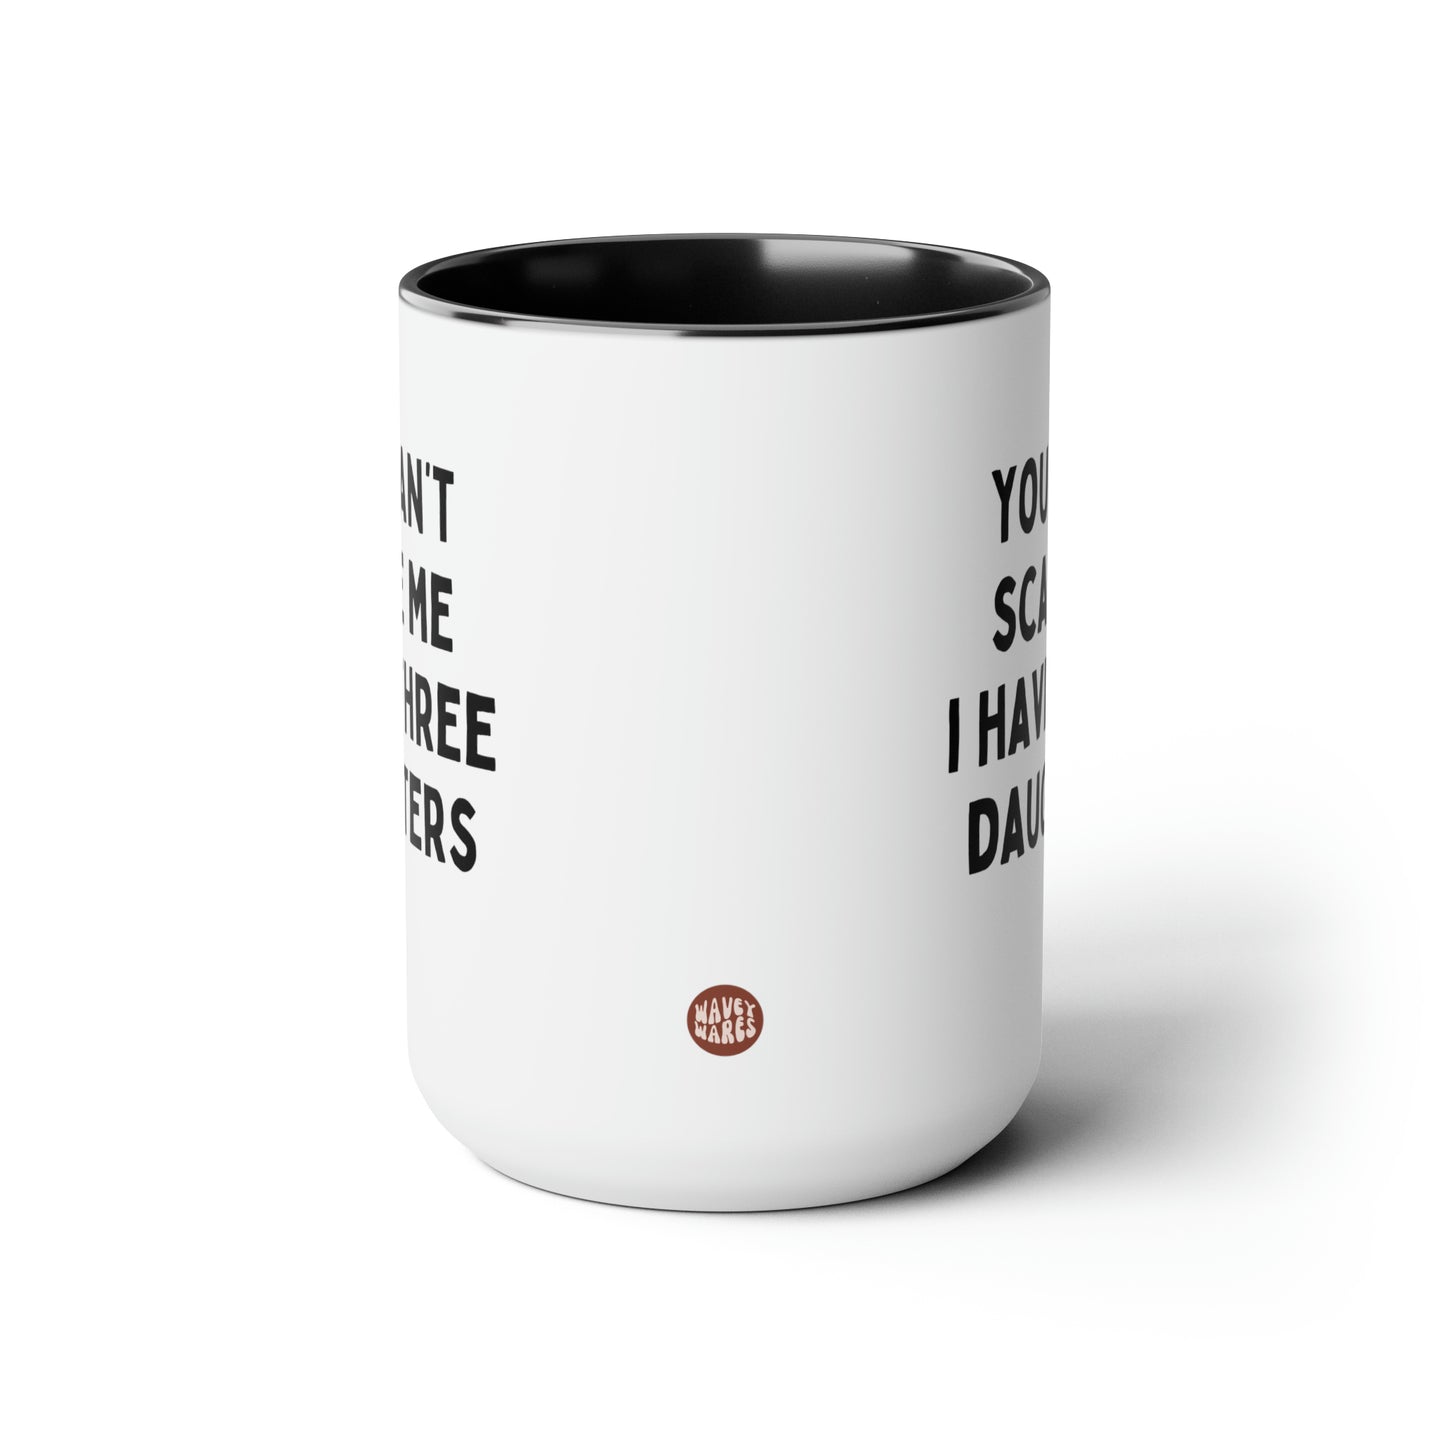 You Can't Scare Me I have Three Daughters 15oz white with black accent funny large coffee mug gift for fathers day dad husband grandpa tea cup waveywares wavey wares wavywares wavy wares side